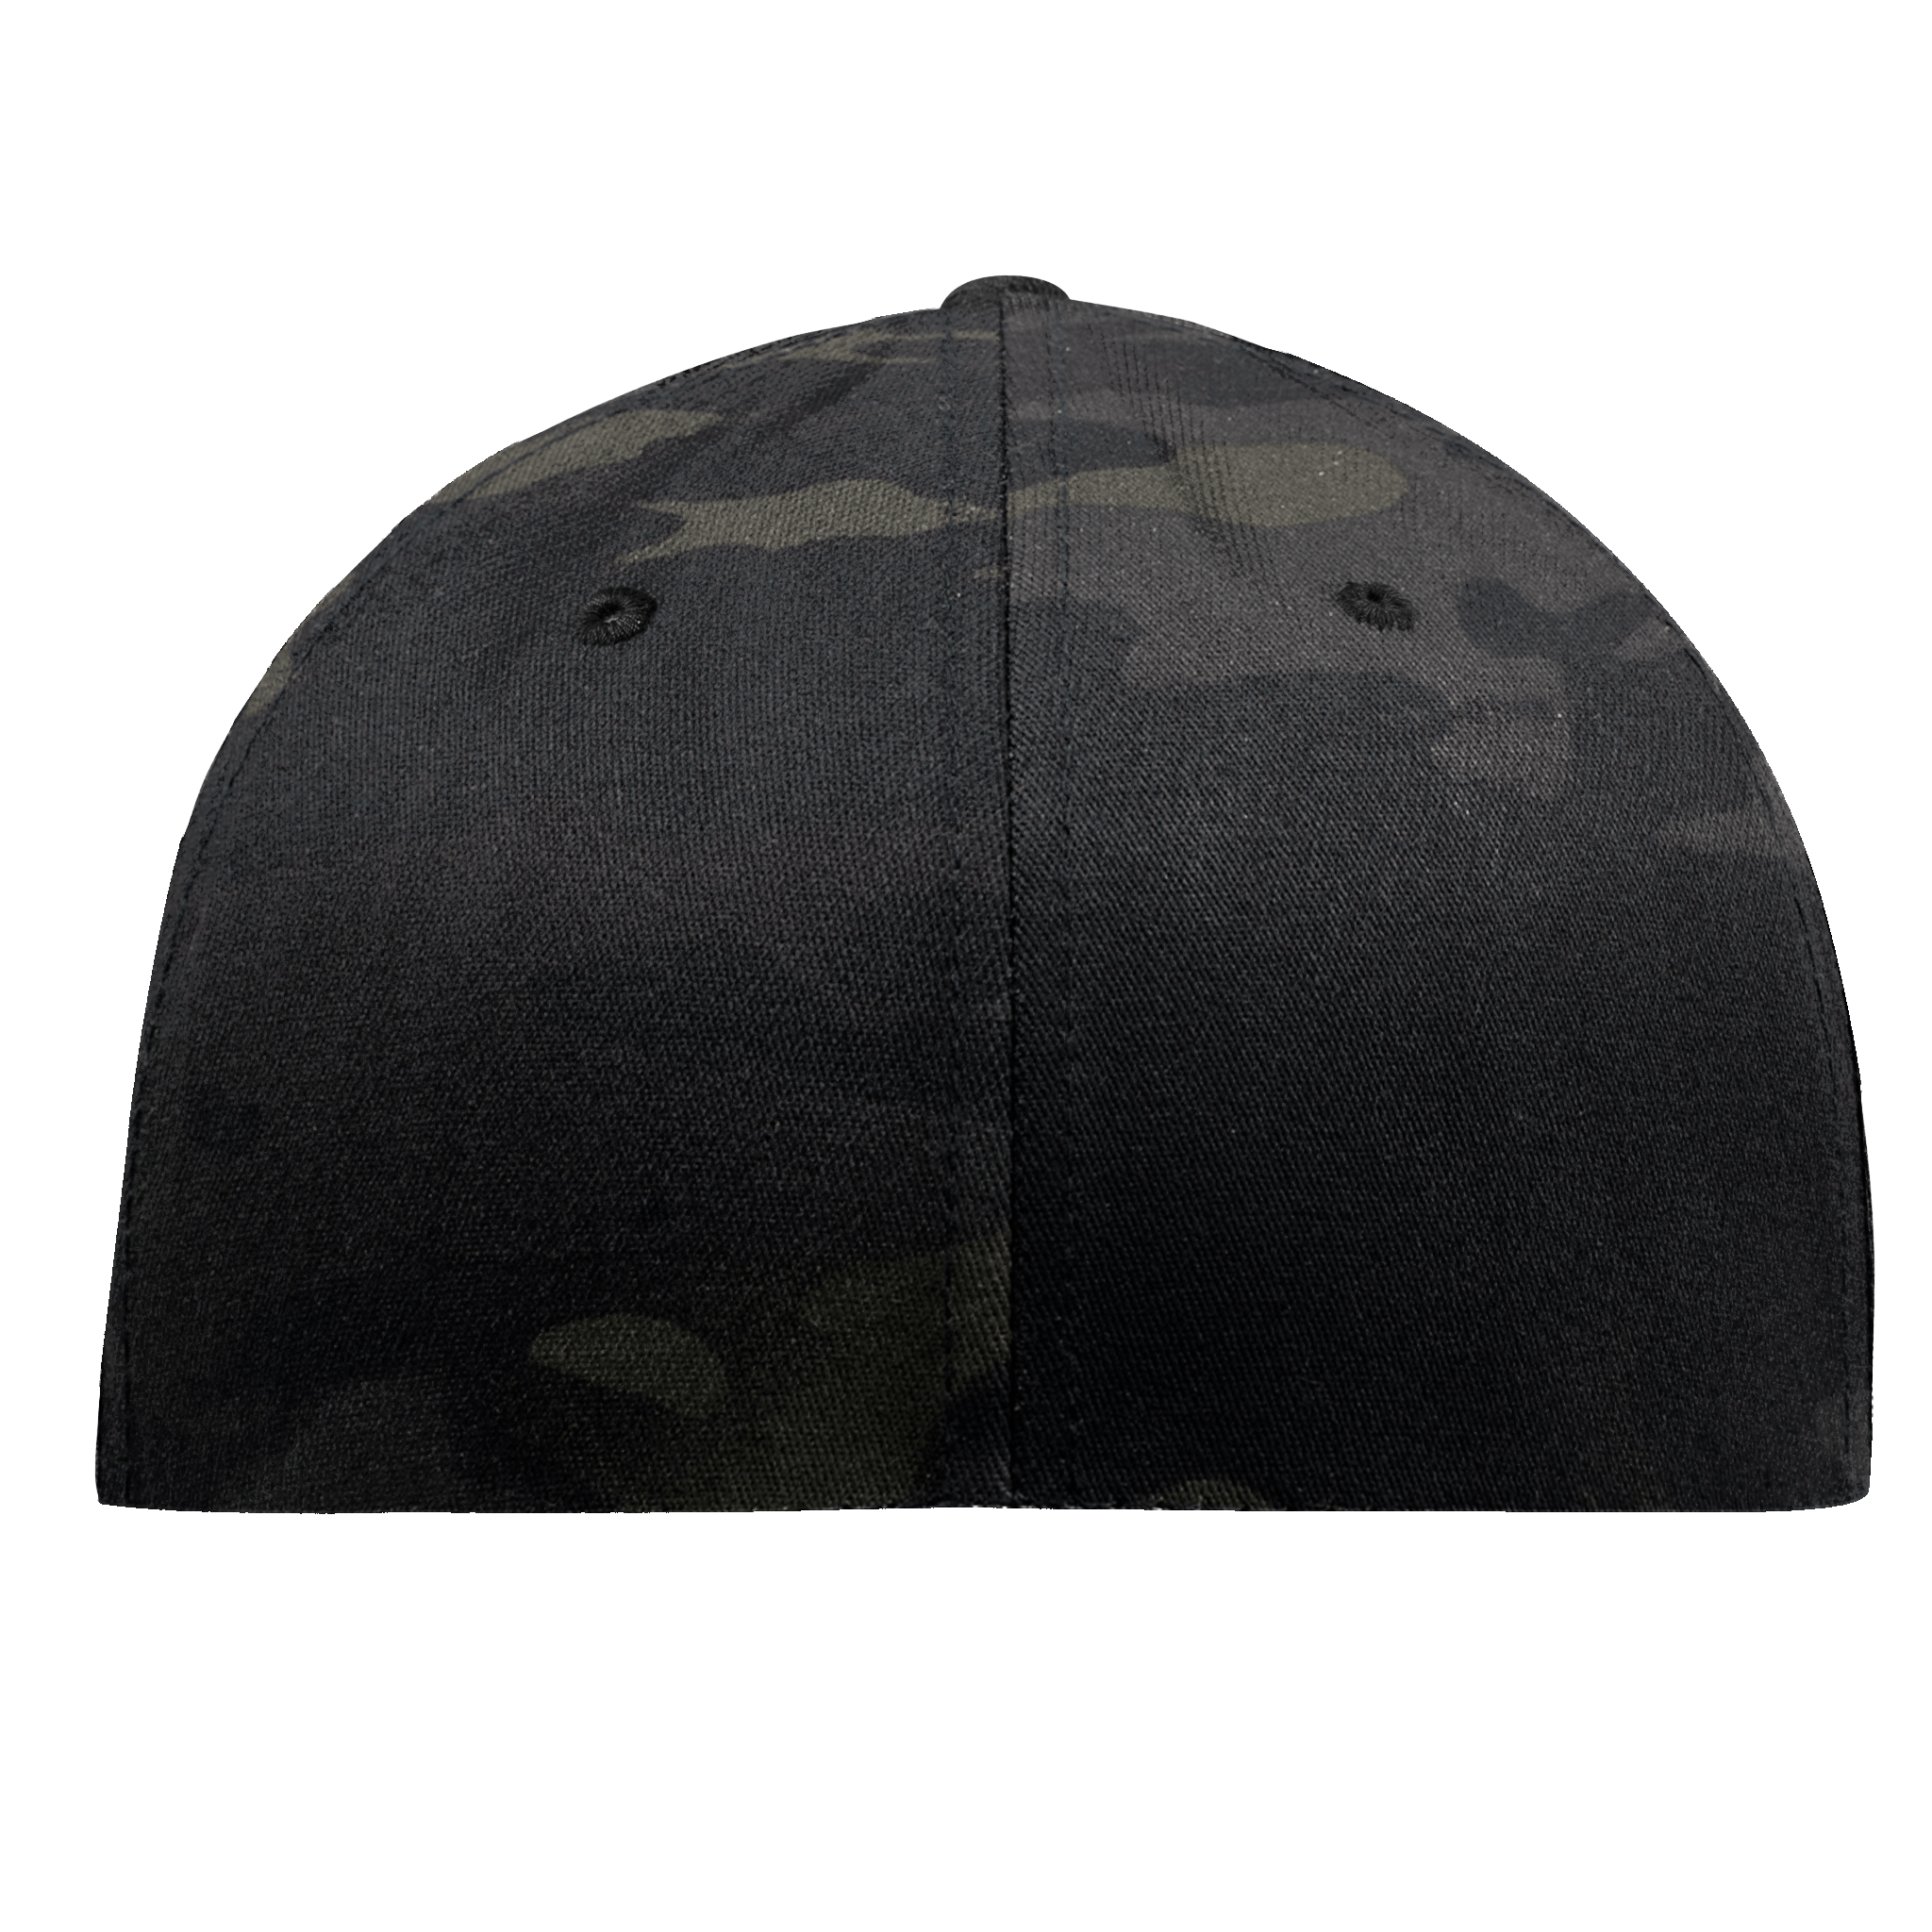 Freedom Eagle Midnight Flexfit Fitted Back Multicam